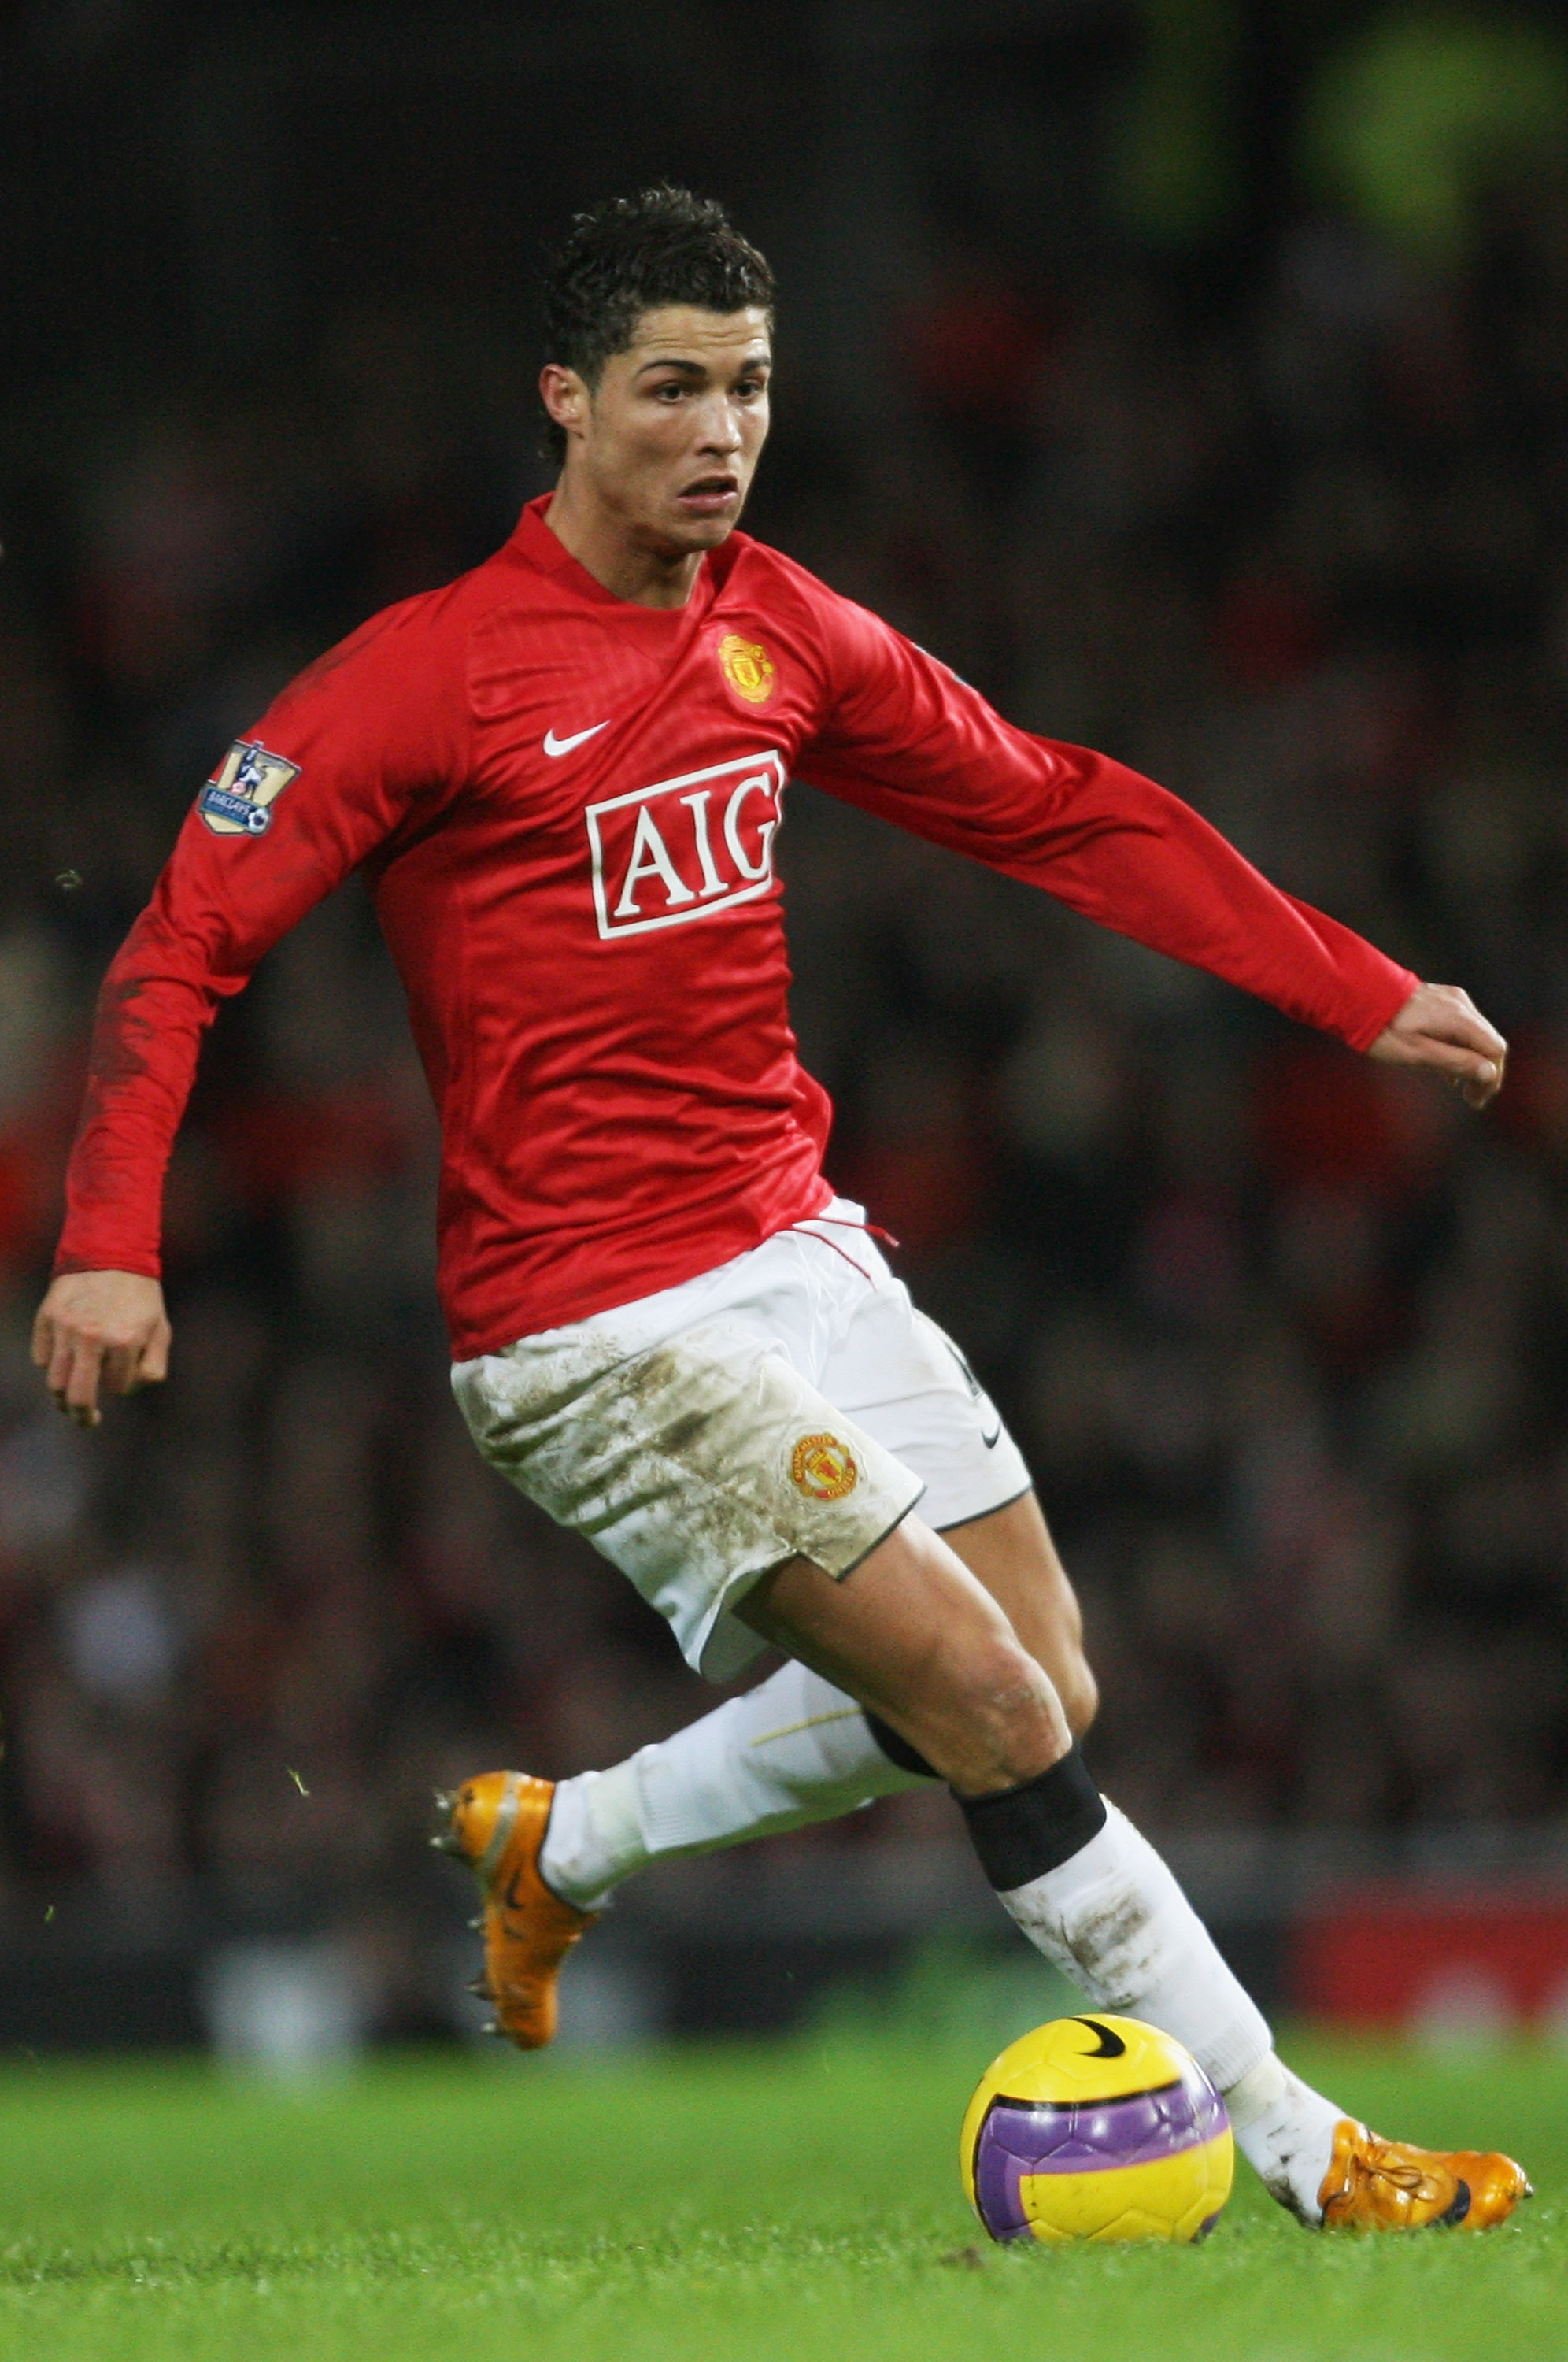 MANCHESTER, UNITED KINGDOM - JANUARY 12:  Cristiano Ronaldo of Manchester runs with the ball during the Barclays Premier League match between Manchester United and Newcastle United at Old Trafford on January 12, 2008 in Manchester, England.  (Photo by Ale